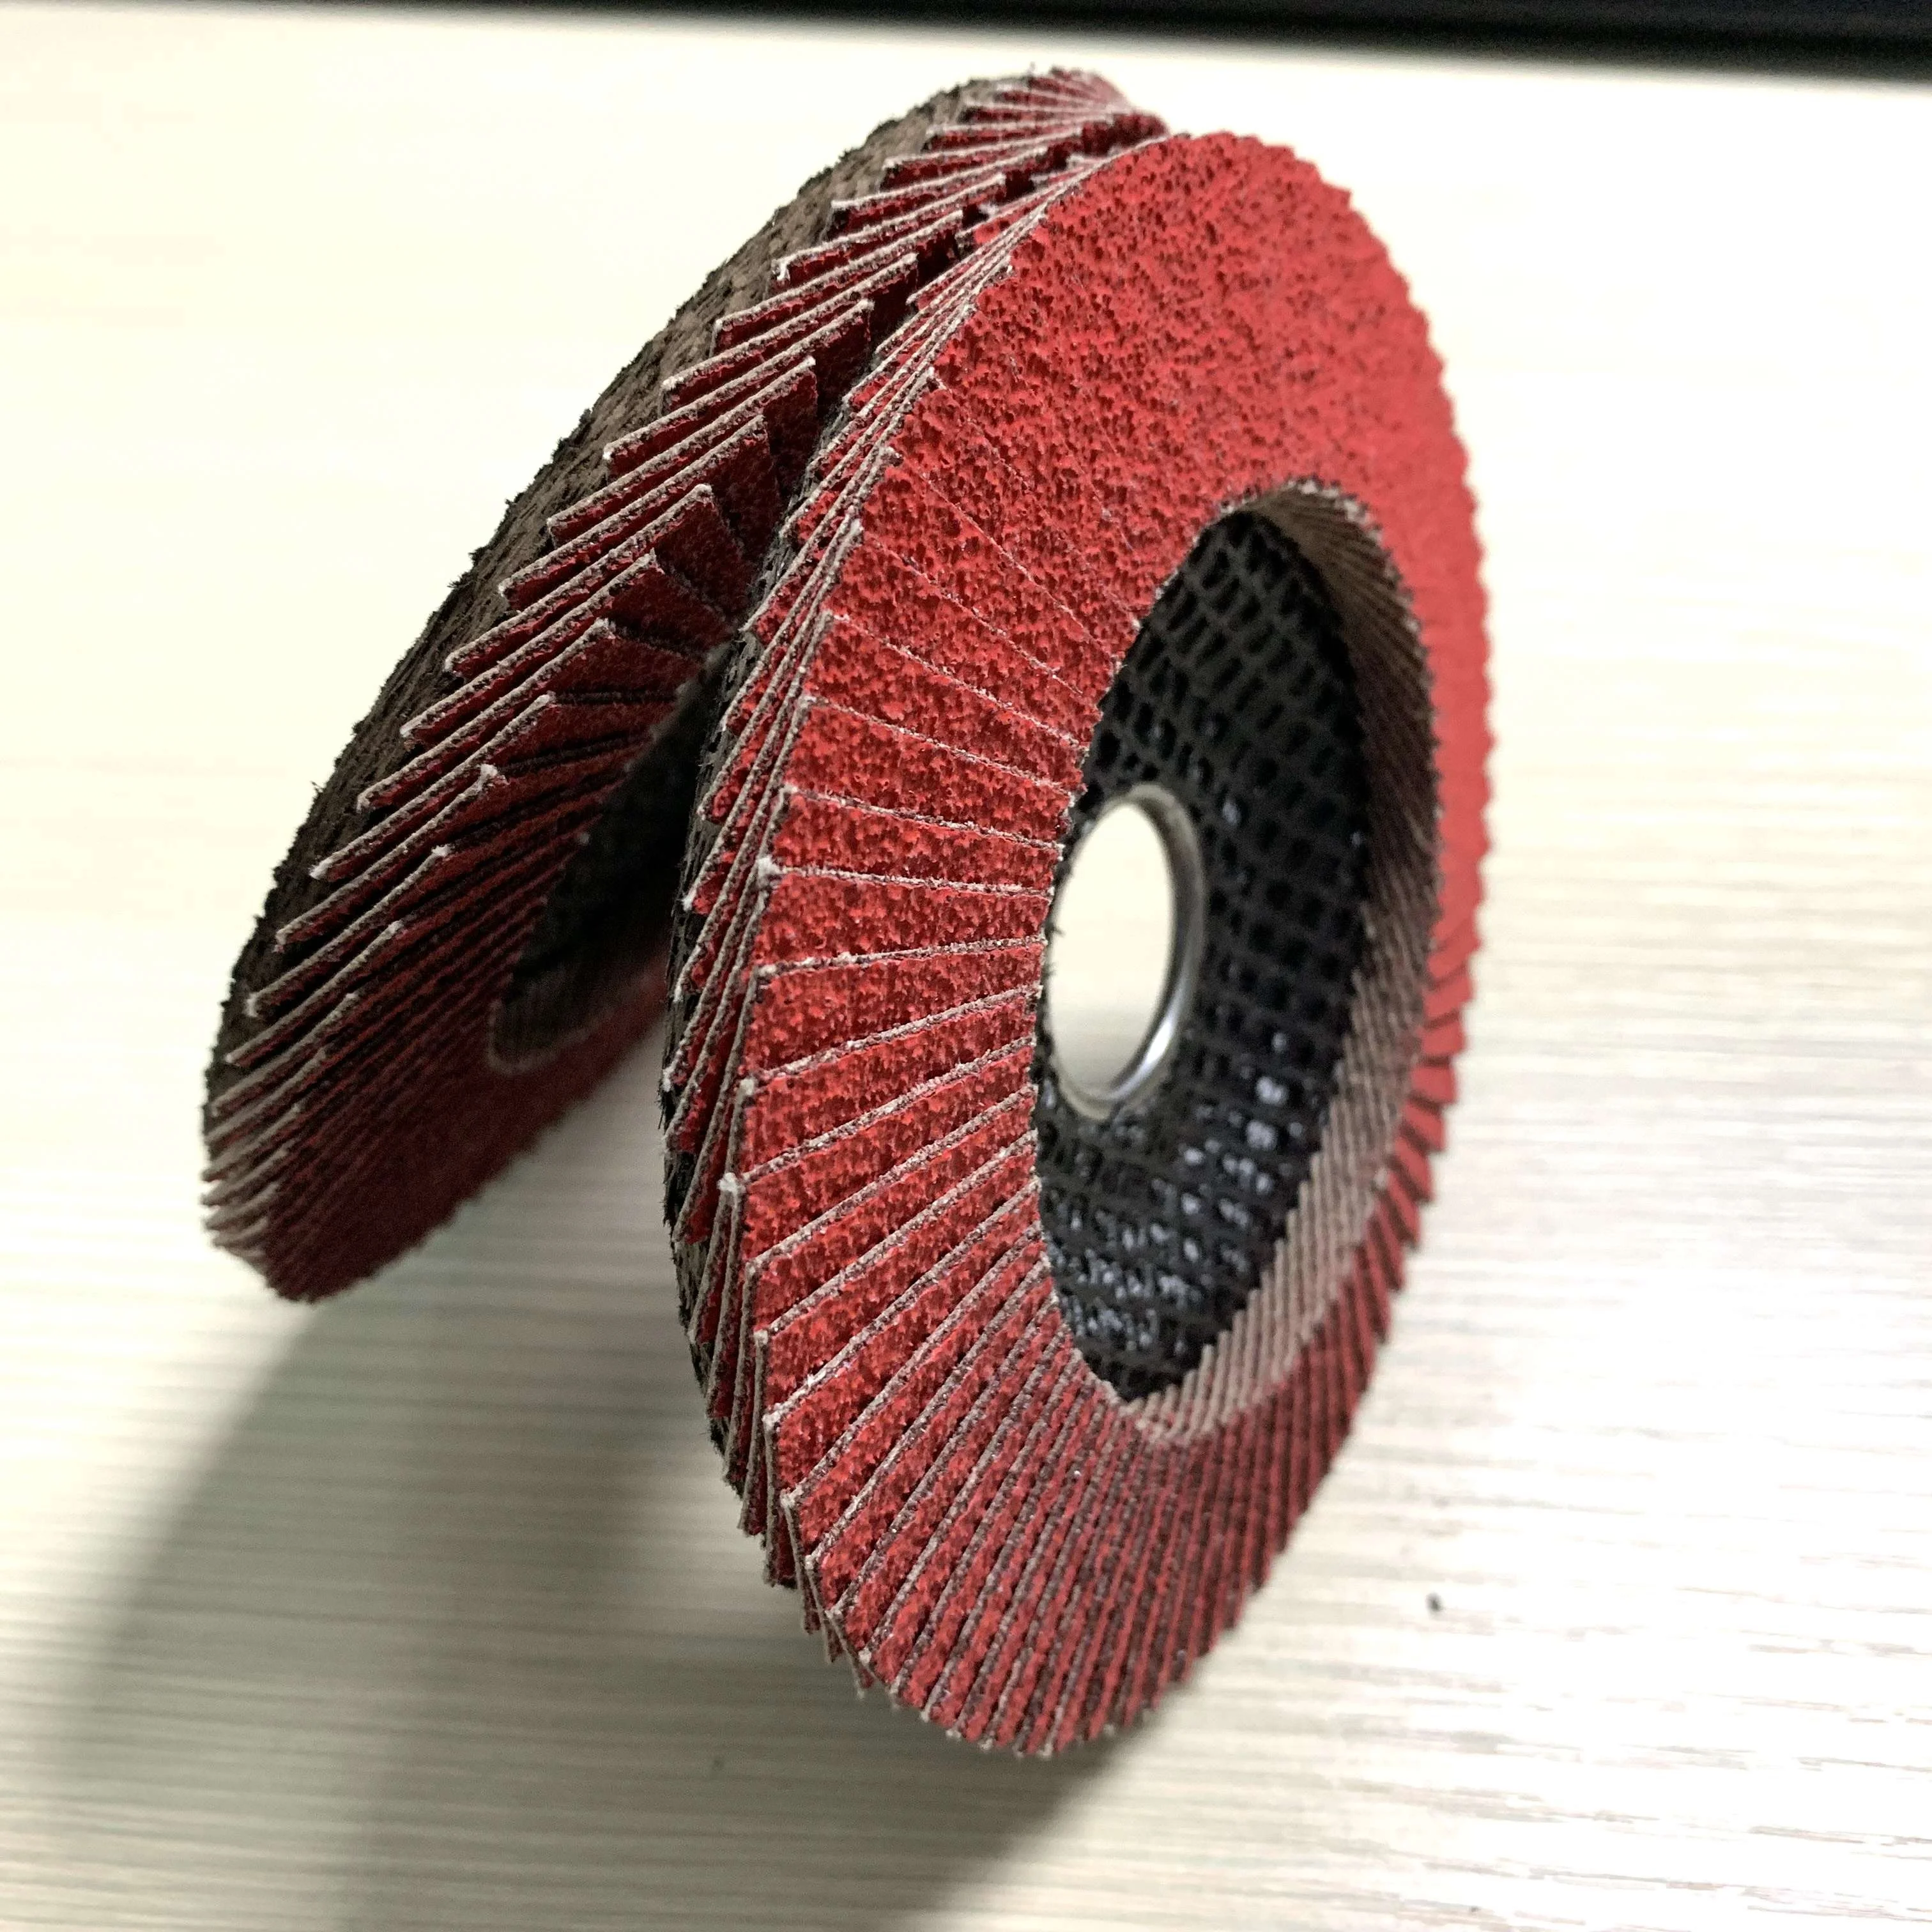 Wholesale New Zirconia Flap Disc for metal grinding Flap Disc with Fiberglass Backing for Stainless Steel Polishing